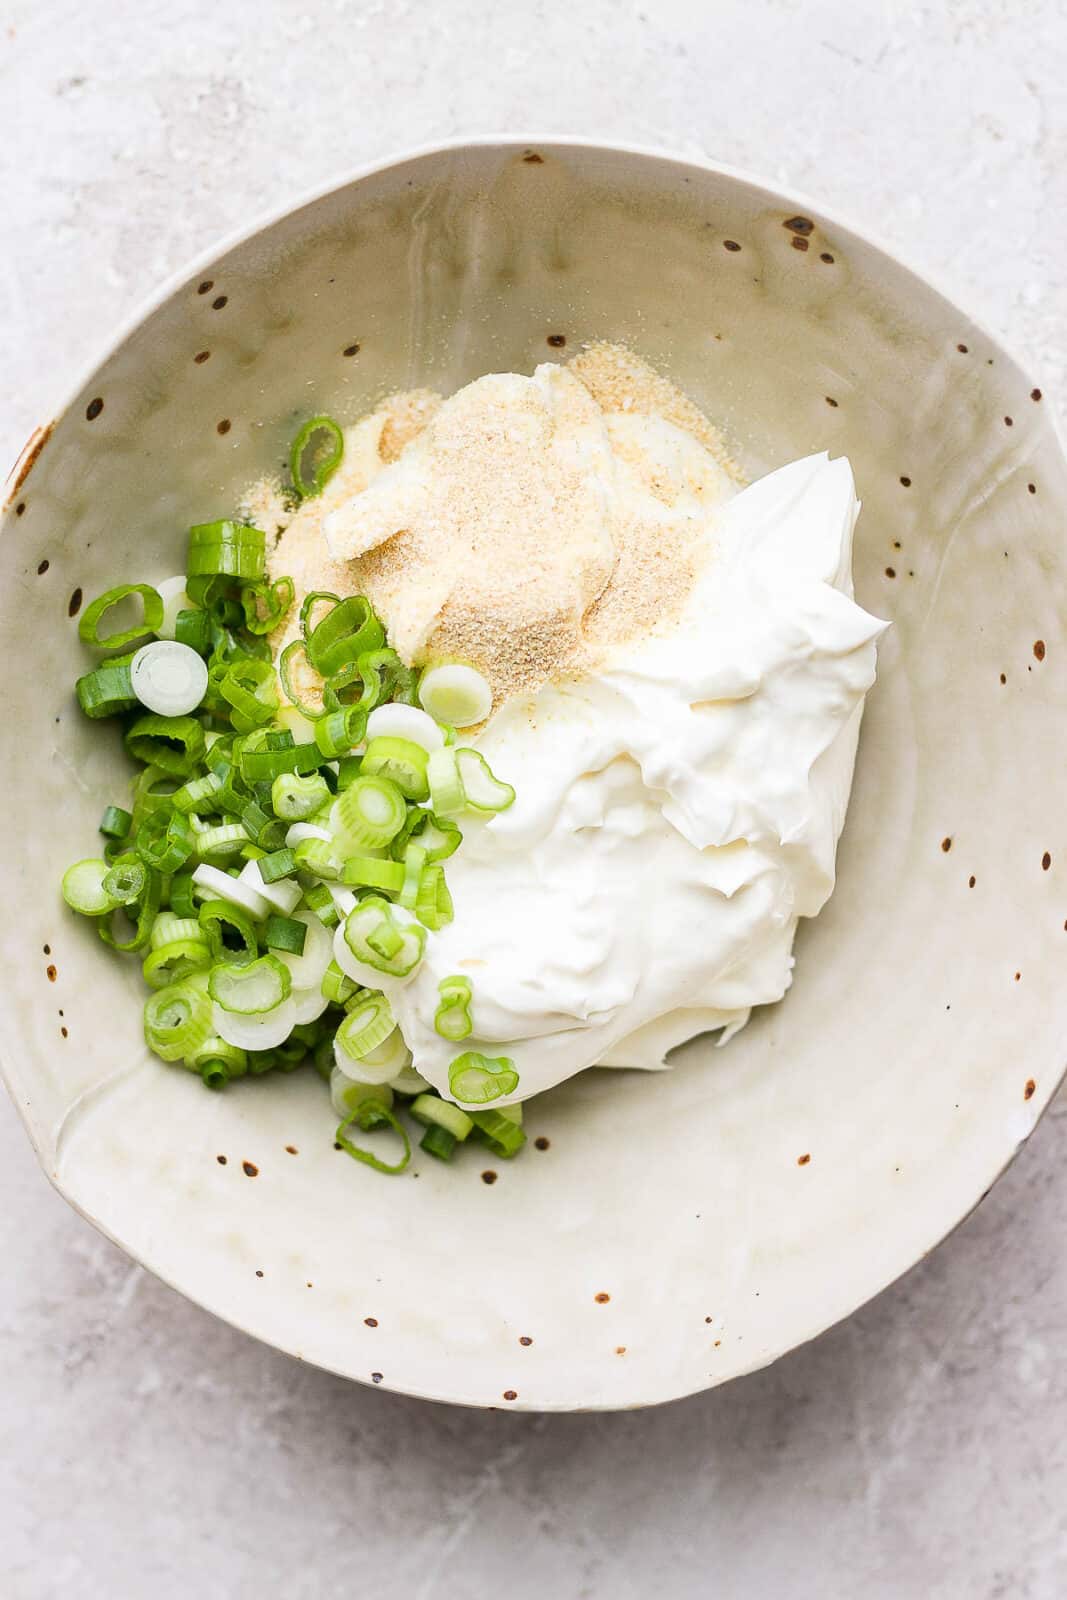 Scallion cream cheese ingredients in a bowl.